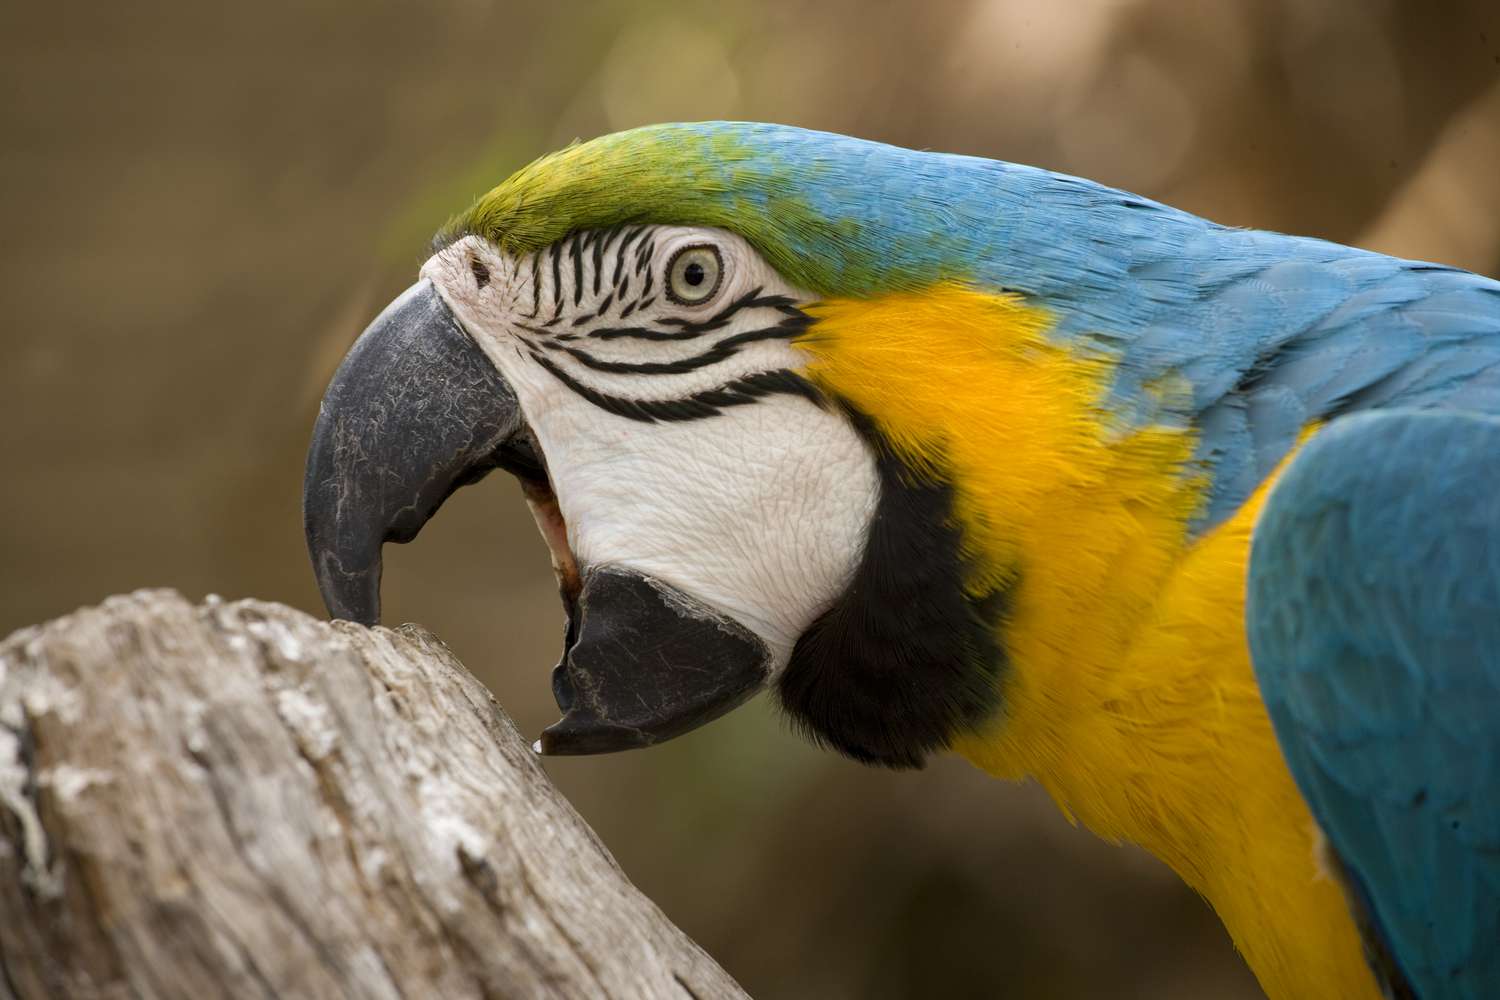 Blue and gold macaw eating log